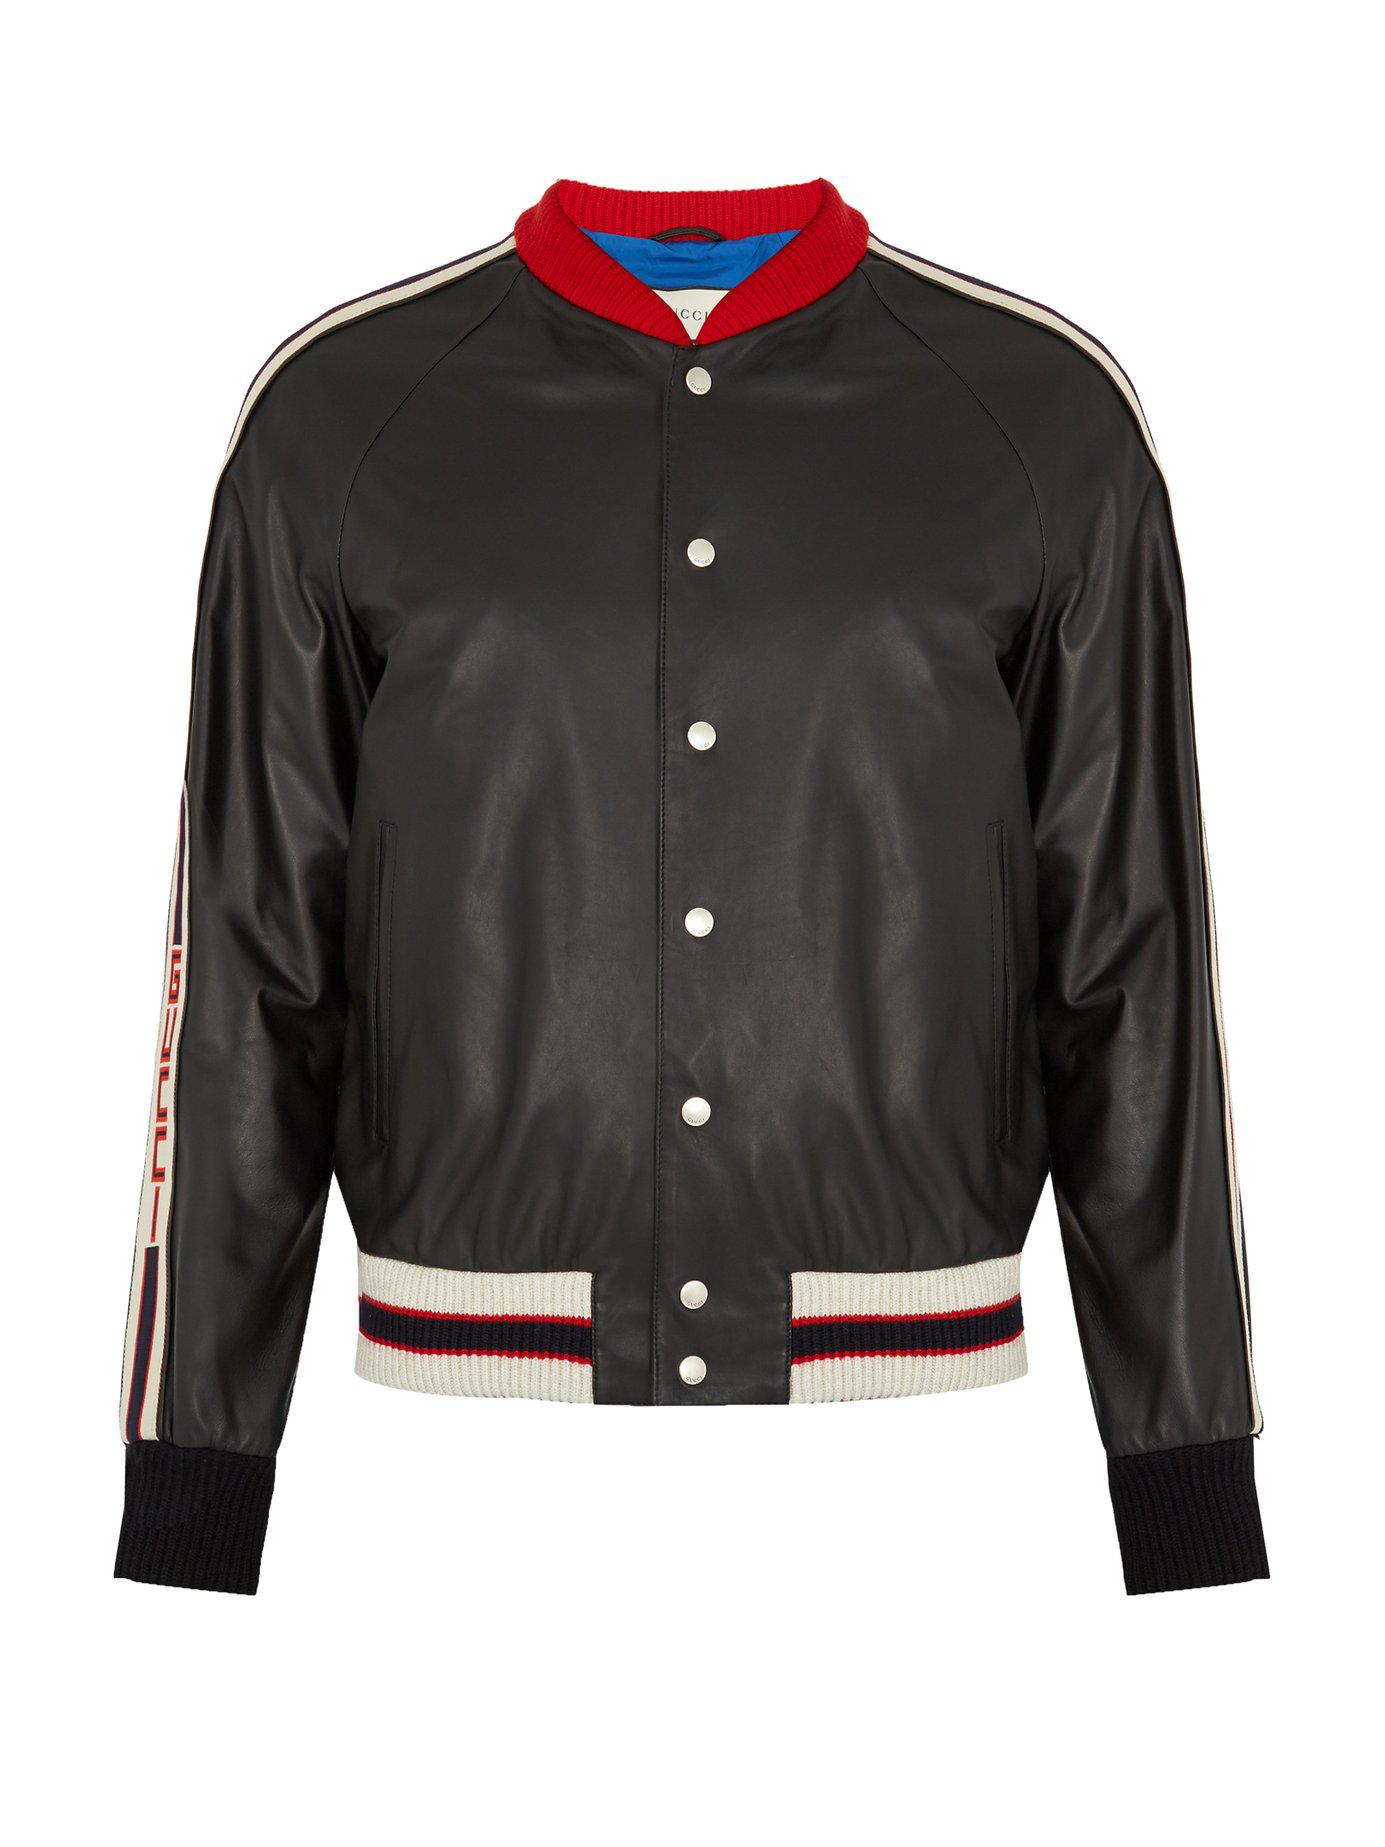 Gucci Hollywood Appliqué Leather Bomber Jacket in Black for Men - Lyst